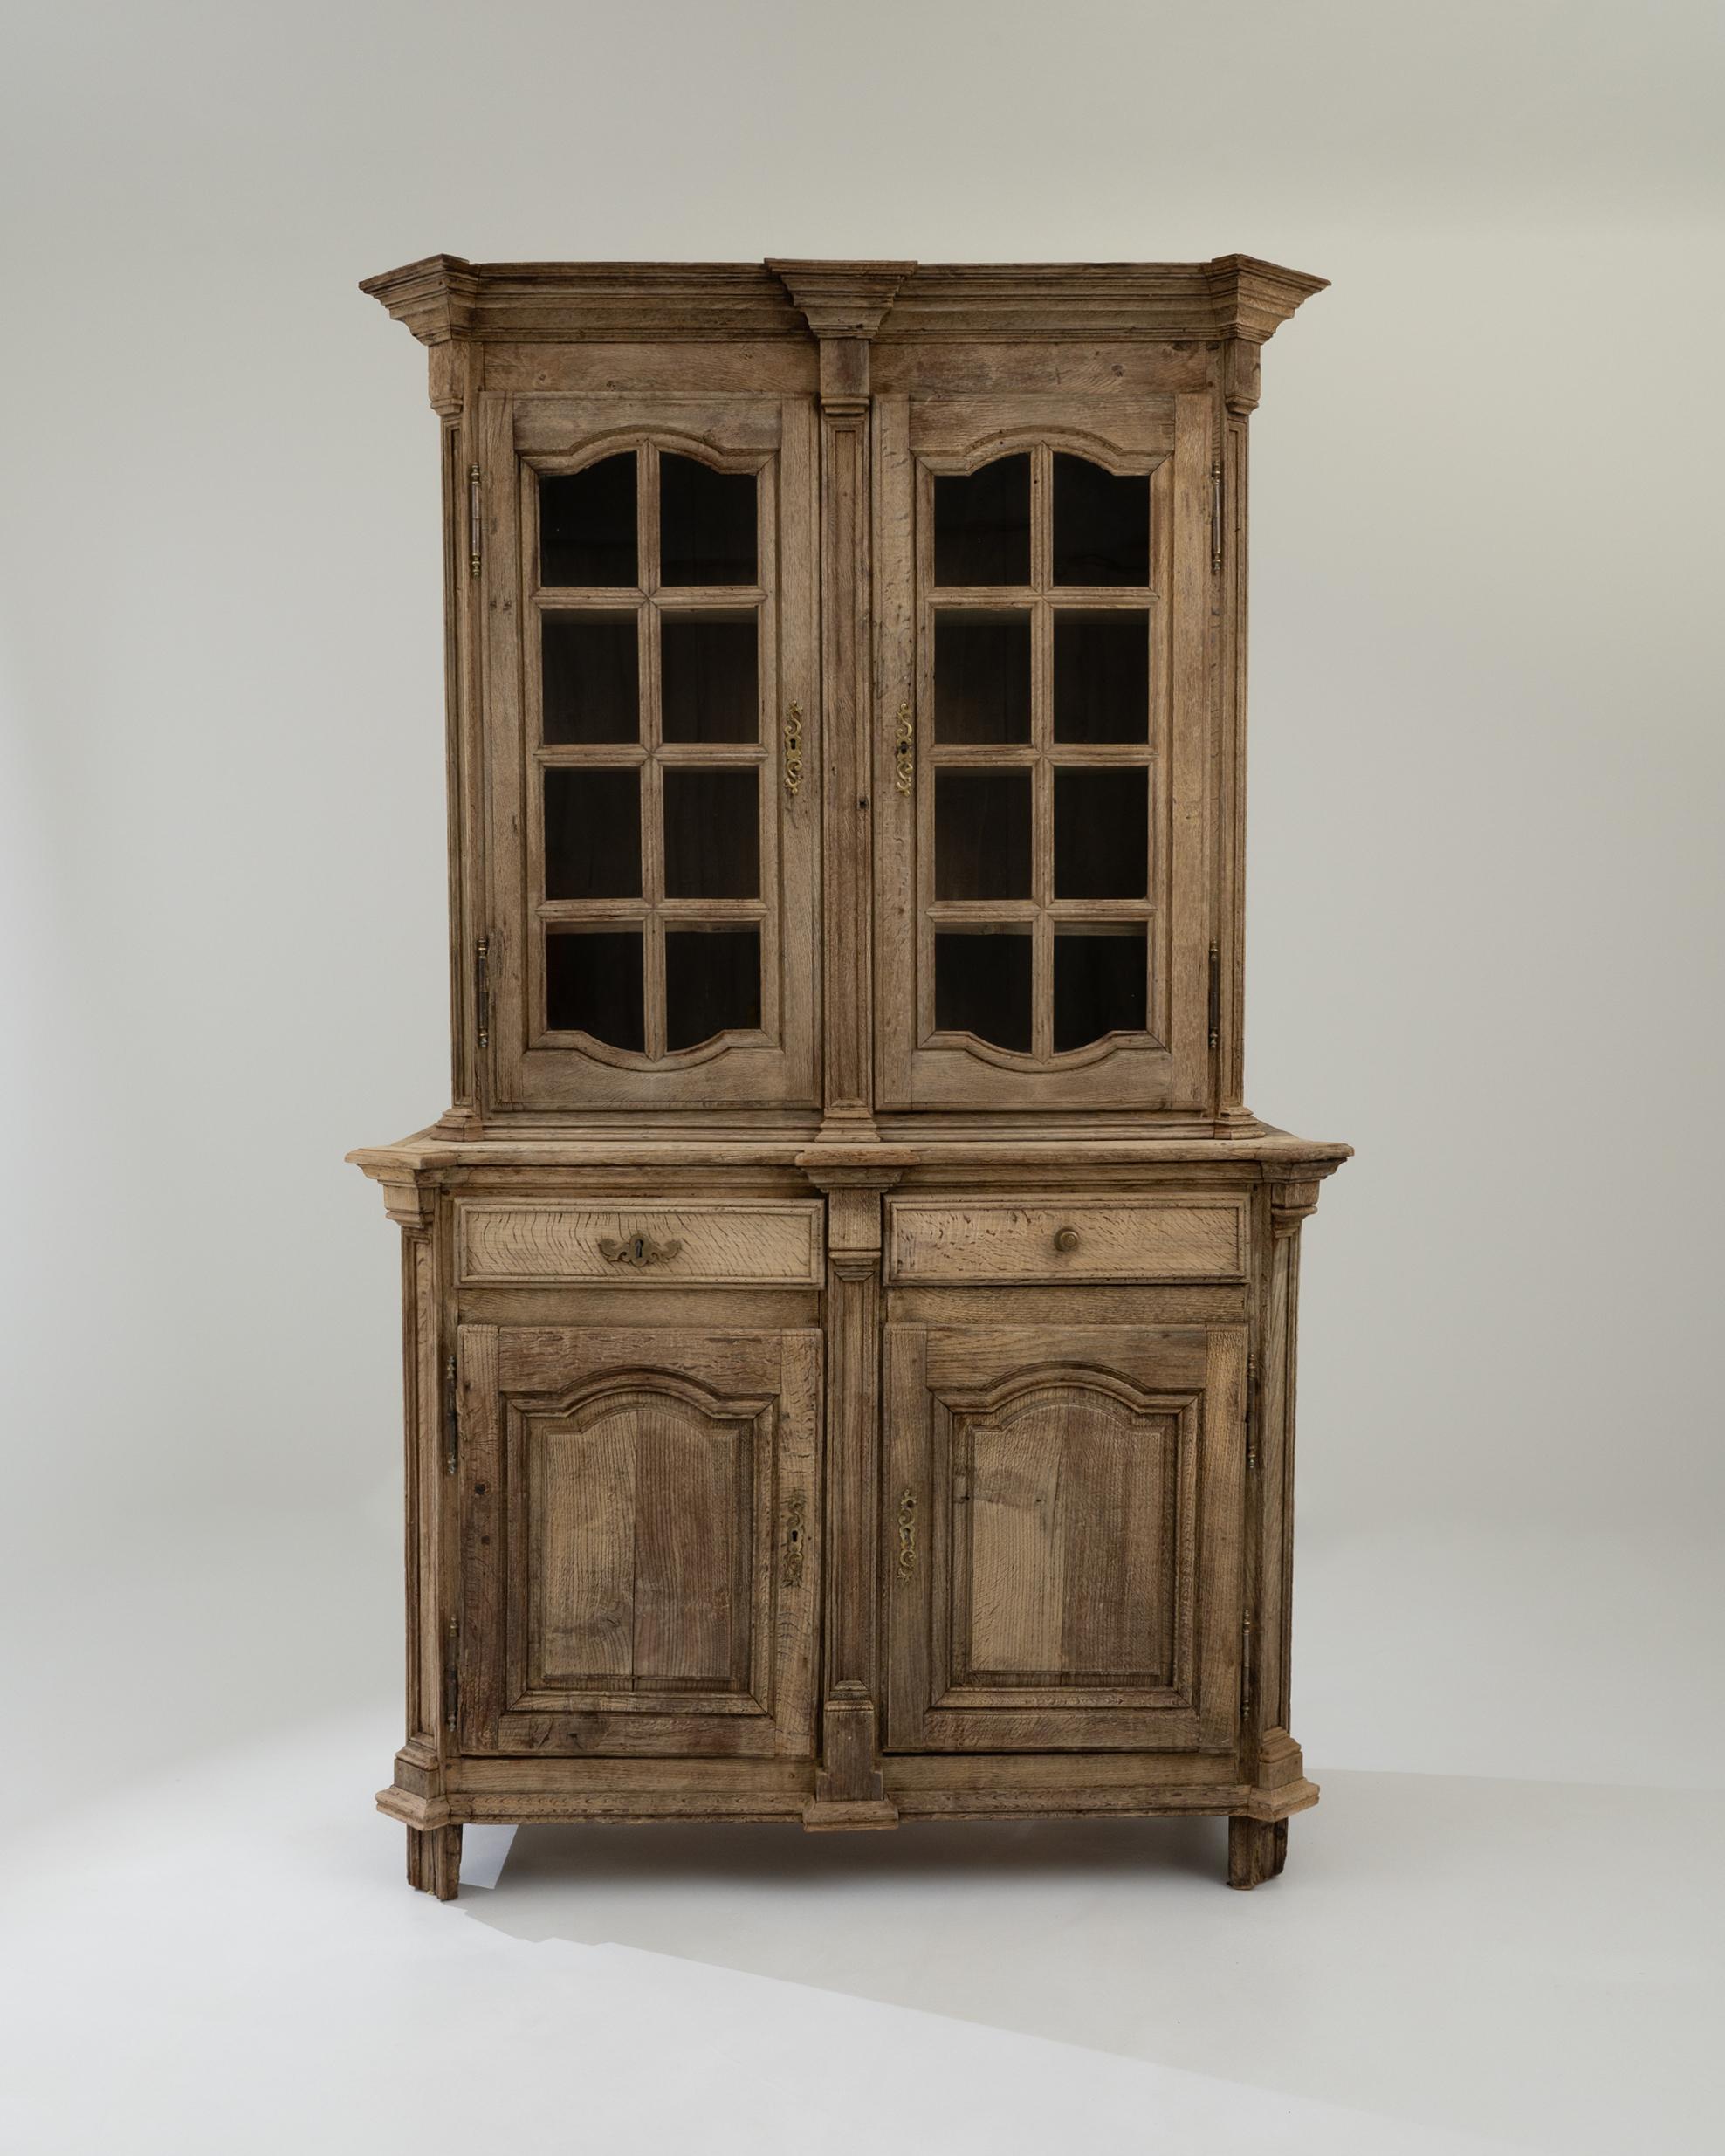 A wooden vitrine created in early 19th century France. Large and grand, yet warm and approachable, this wondrous display cabinet is pulled straight from a fairy tale. A delicate bleaching process has been applied to the surface of the oak, adding an